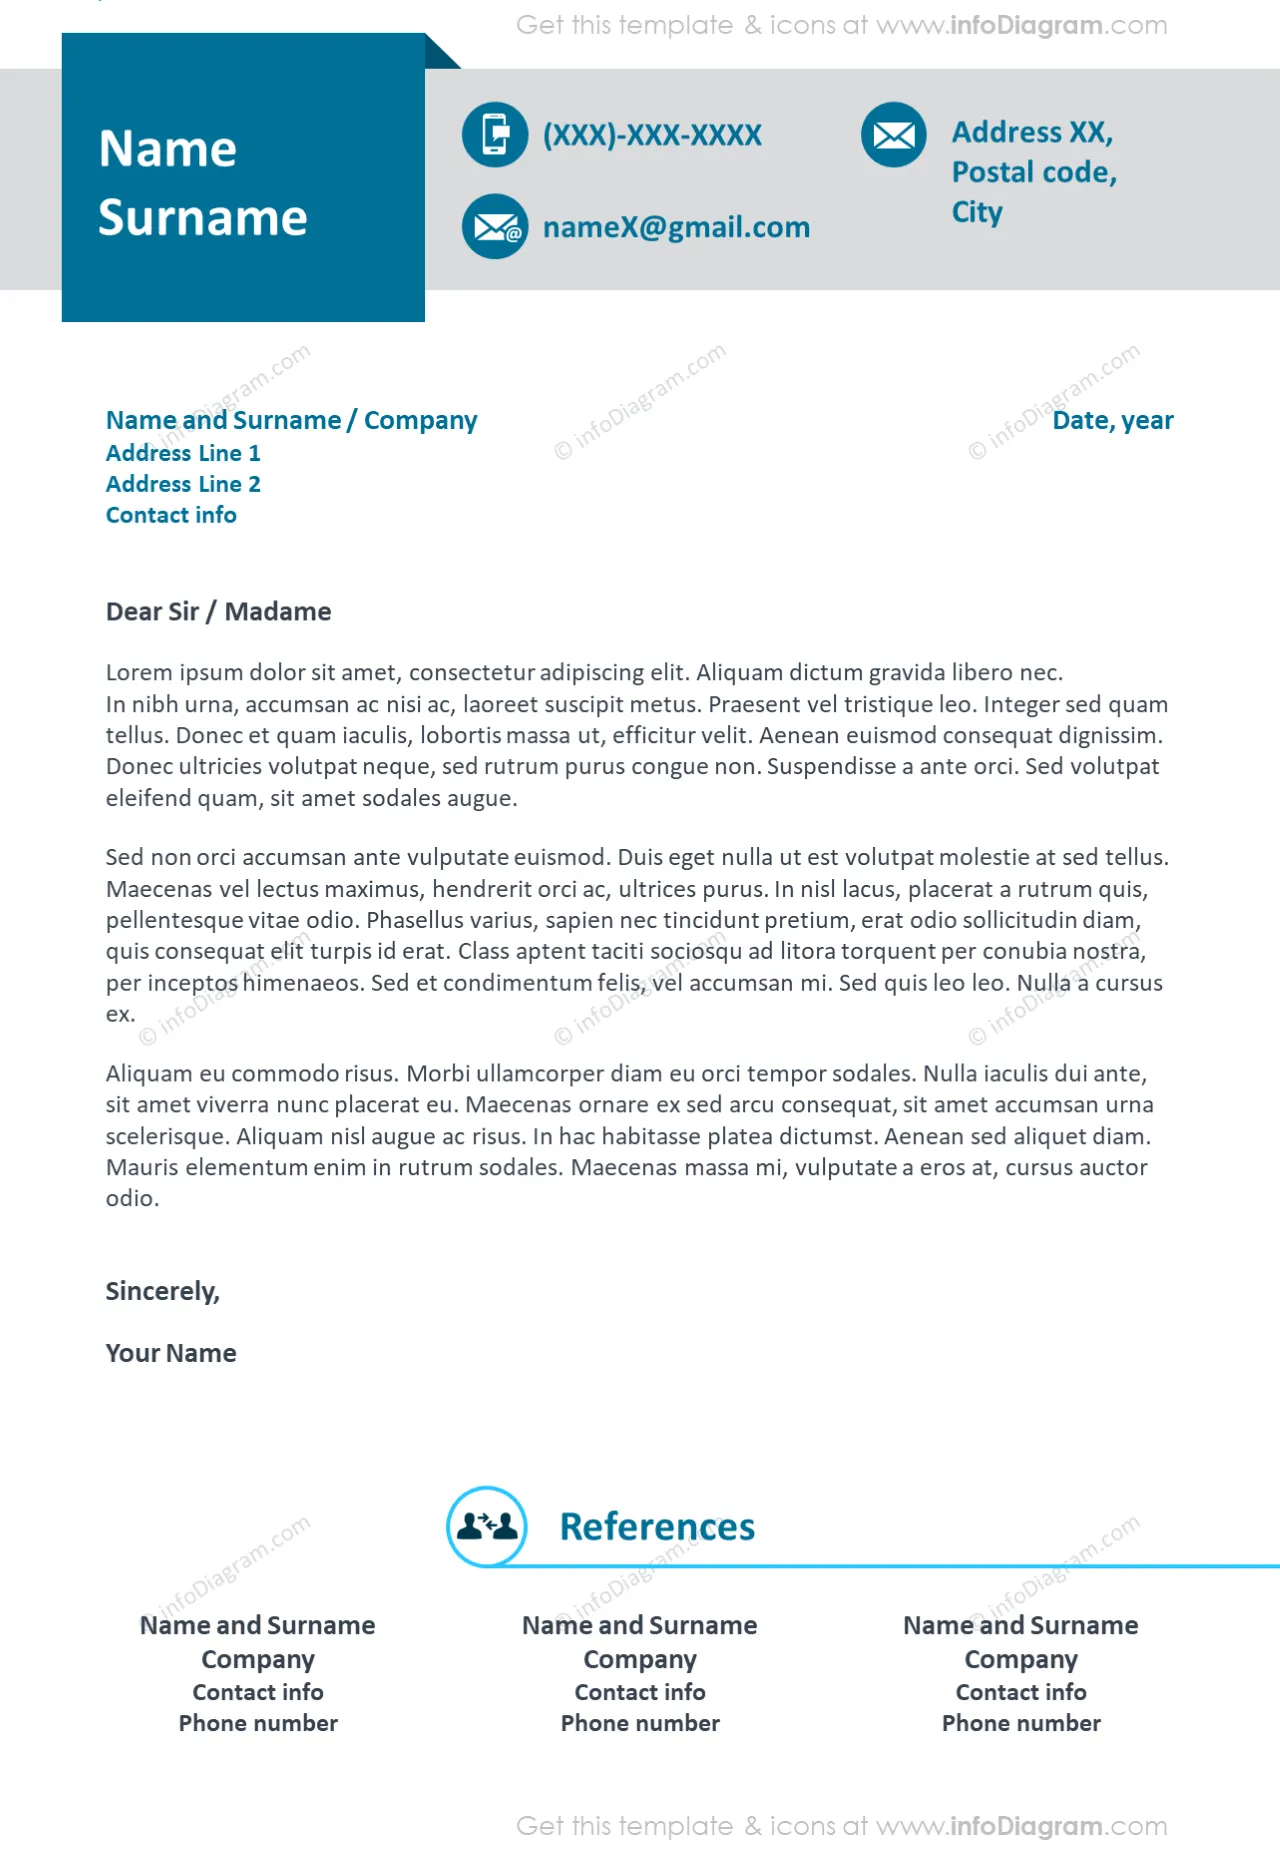 Professional blue ribbon visual motivation letter and references example